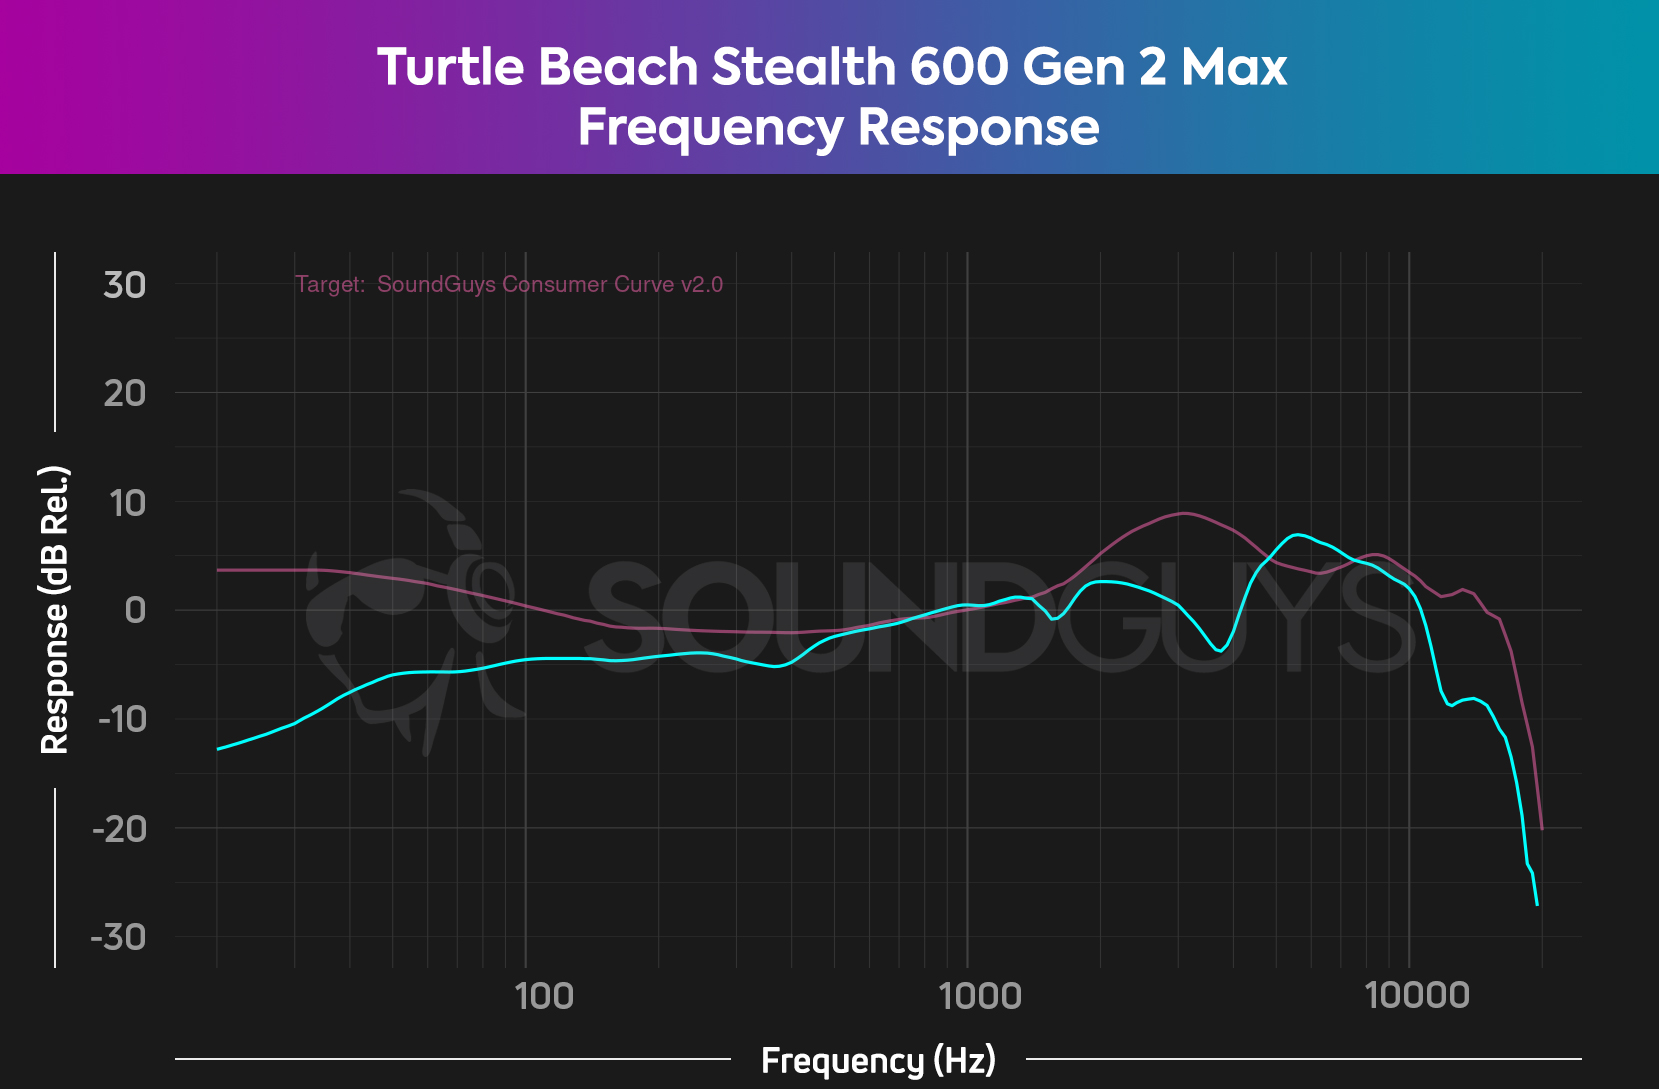 A frequency response chart for the Turtle Beach Stealth 600 Gen 2 MAX gaming headset, which shows a notable lack of emphasis in bass range sound.